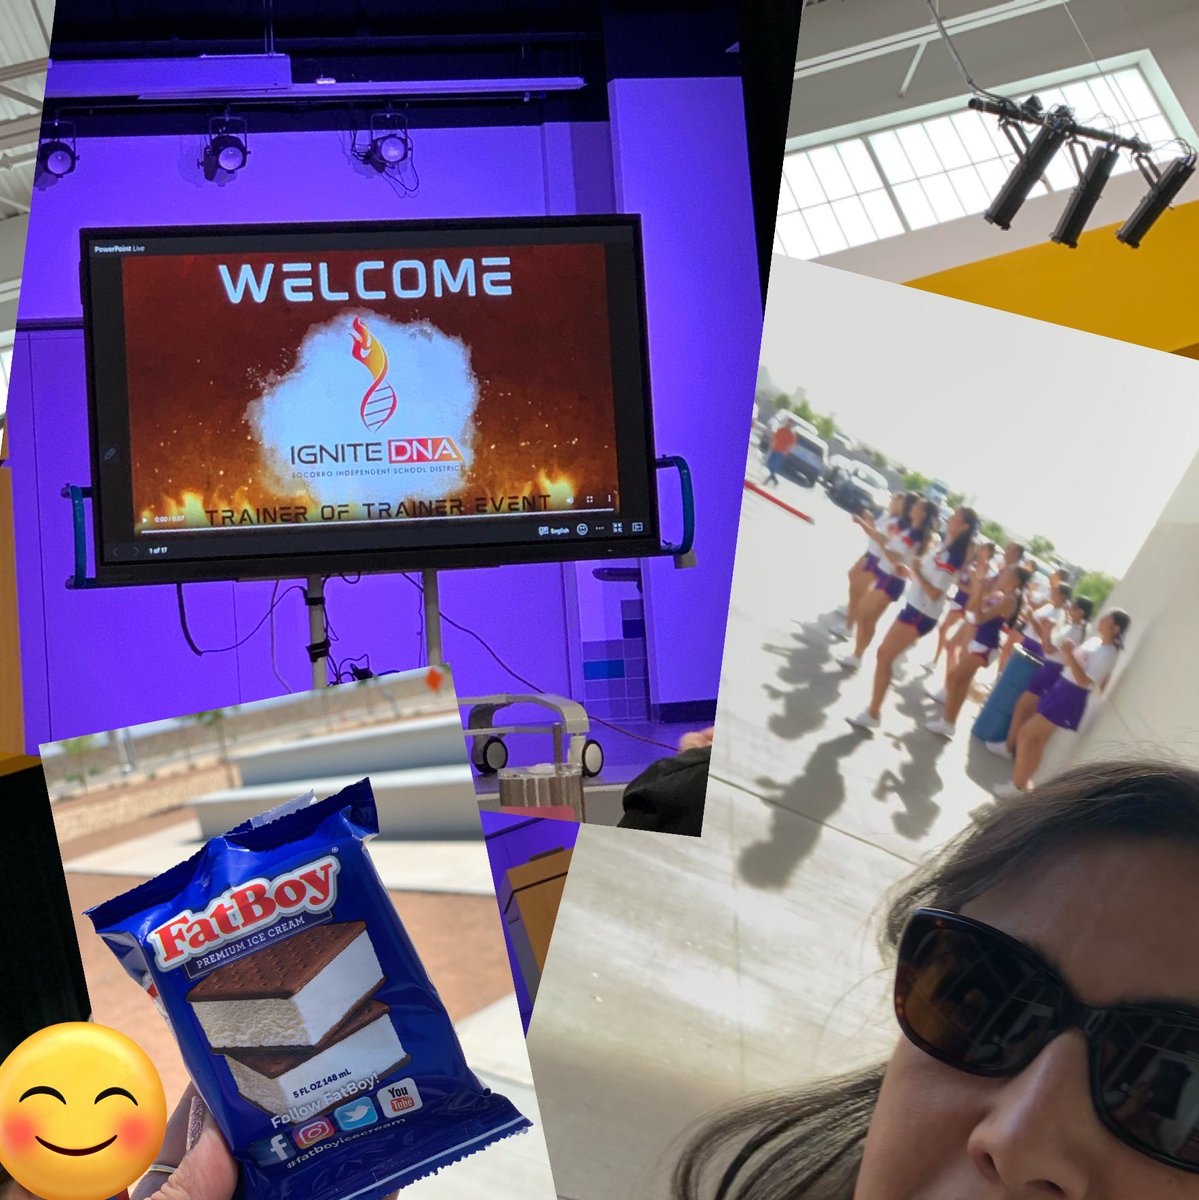 What an amazing day of training yesterday! Greeted by Eastlake cheer n Pebble Hills drumline then closed the day w an ice cream treat!🙃 Thank you @cmaquilina_ @EdTechDani @techgretch & @SISD_InstrTech! #TeamSISD #IgniteDNA_TOT @Eastlake_HS #SISDFineArts